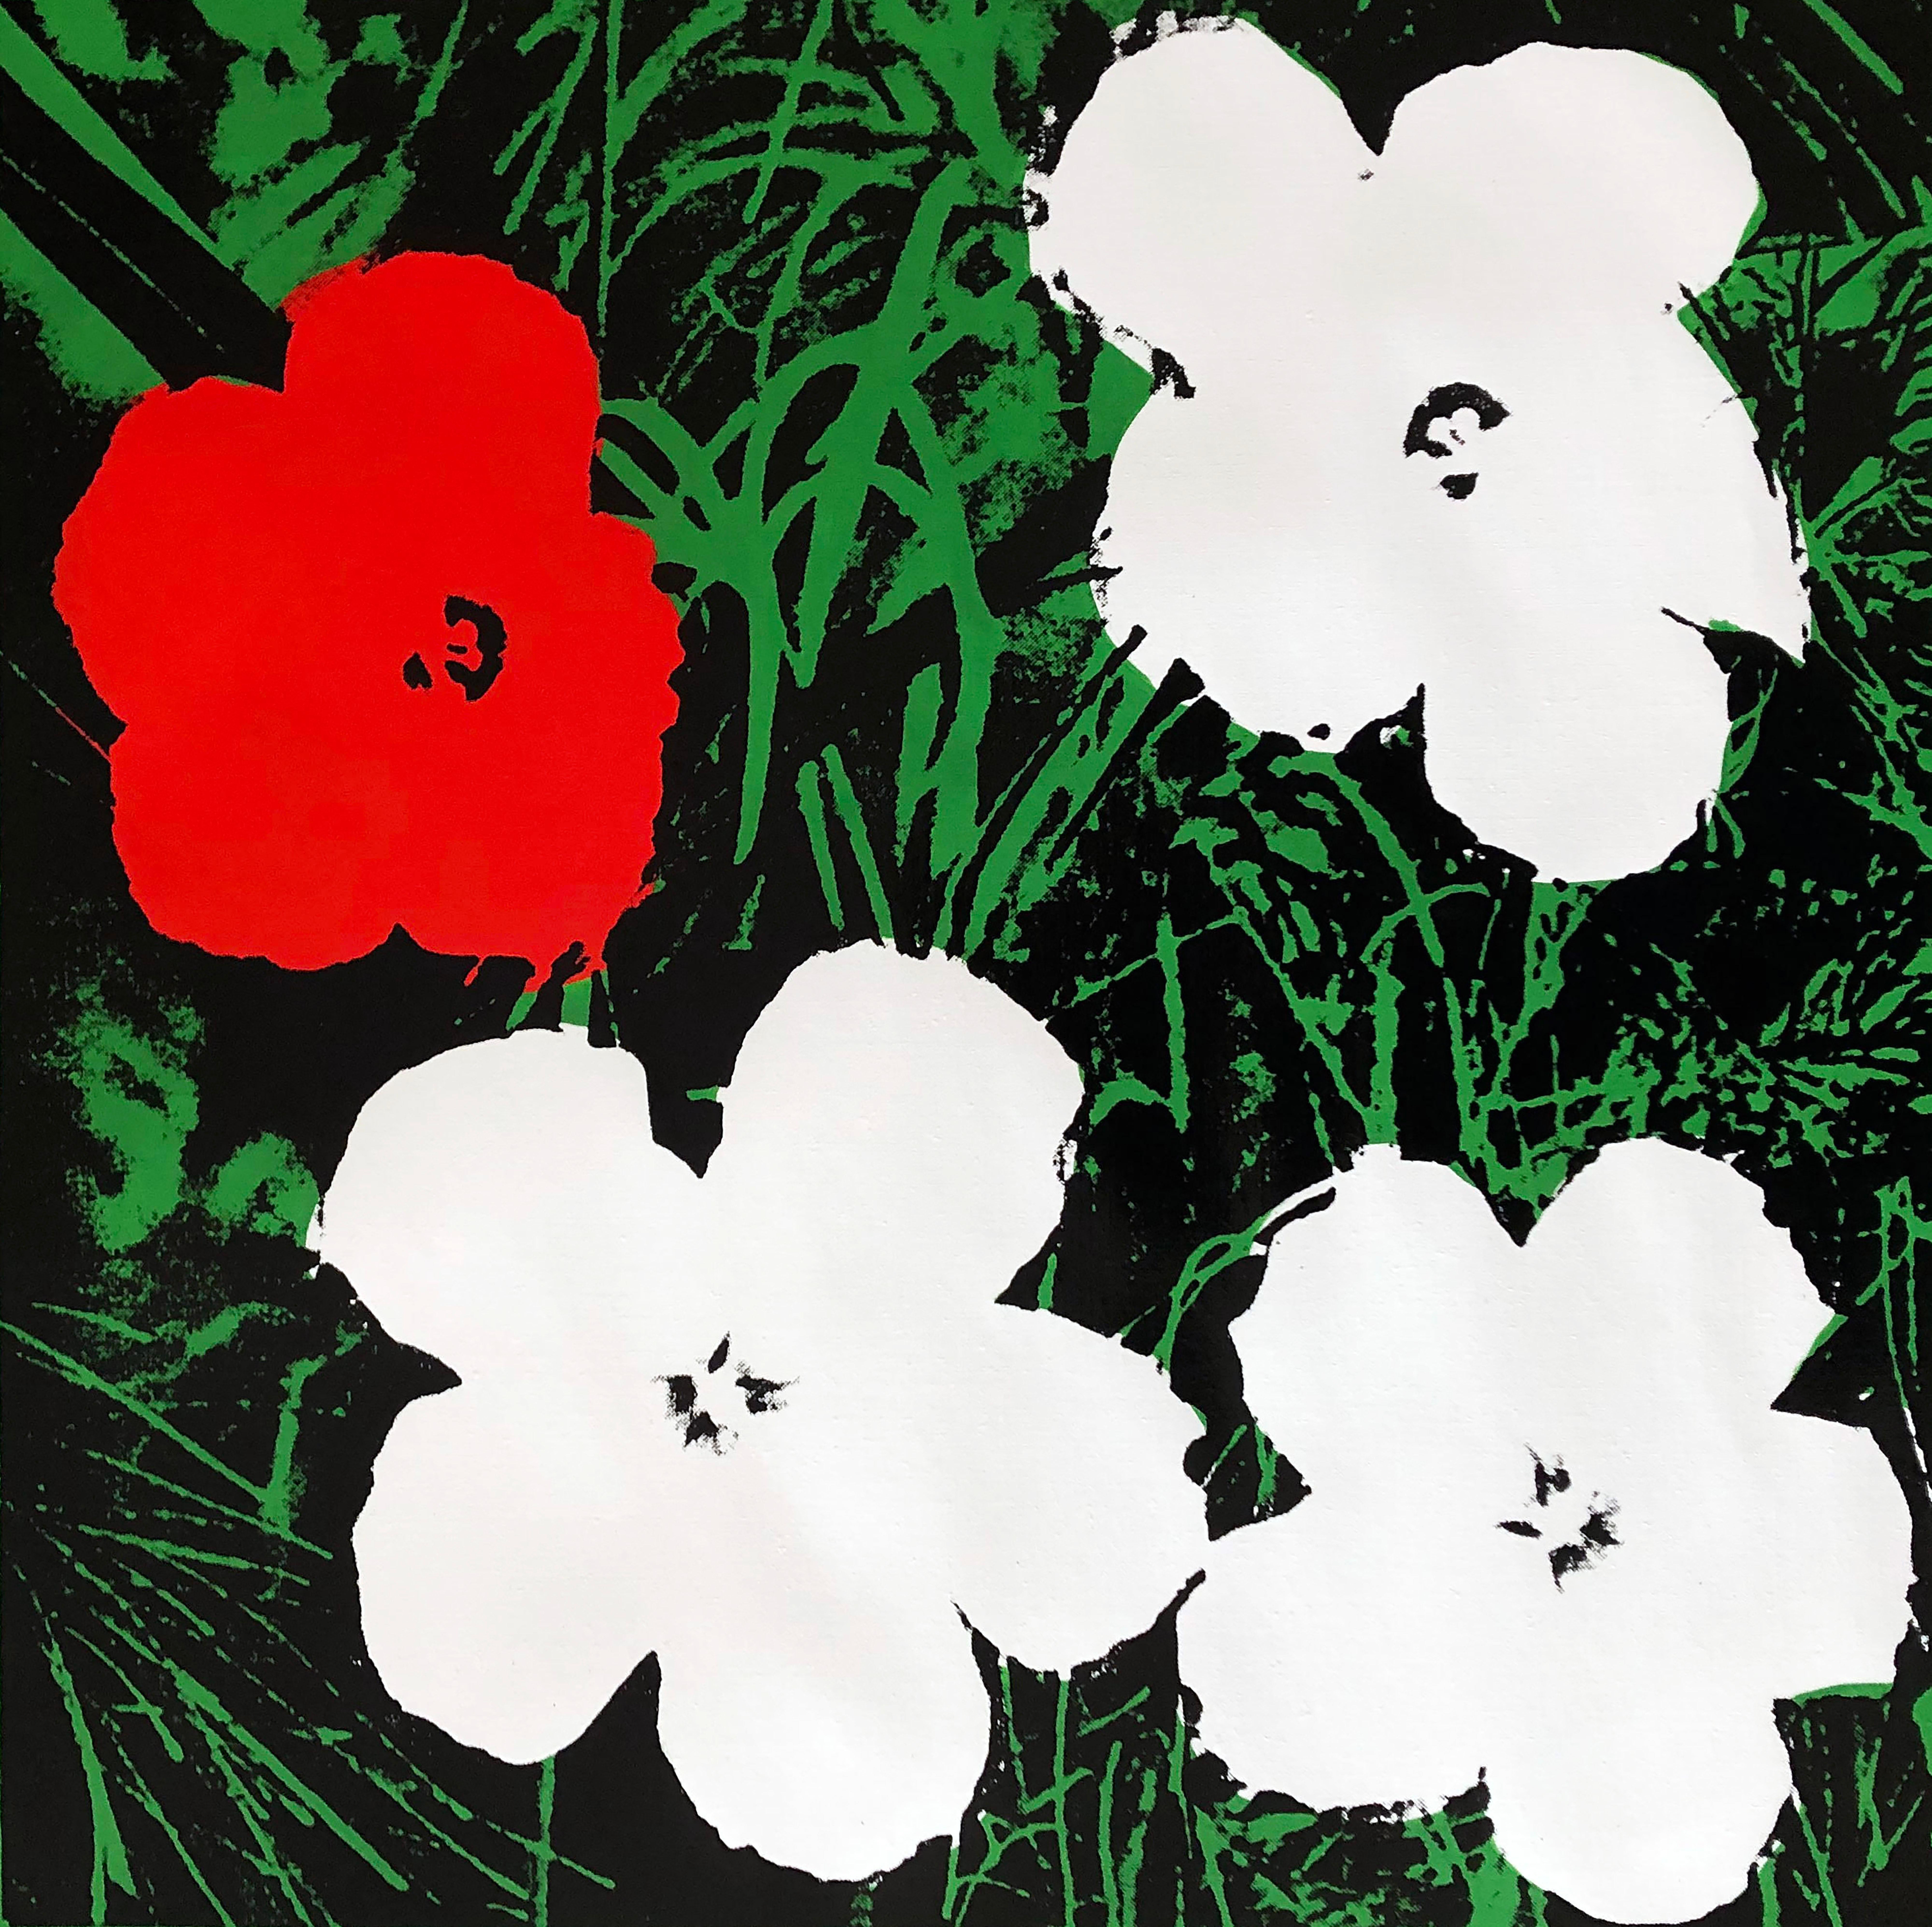 Denied Warhol Flowers, (White & Red) Silkscreen Linen Painting by Charles Lutz
Silkscreen and acrylic on linen with Denied stamp of the Andy Warhol Art Authentication Board. 
24 x 24